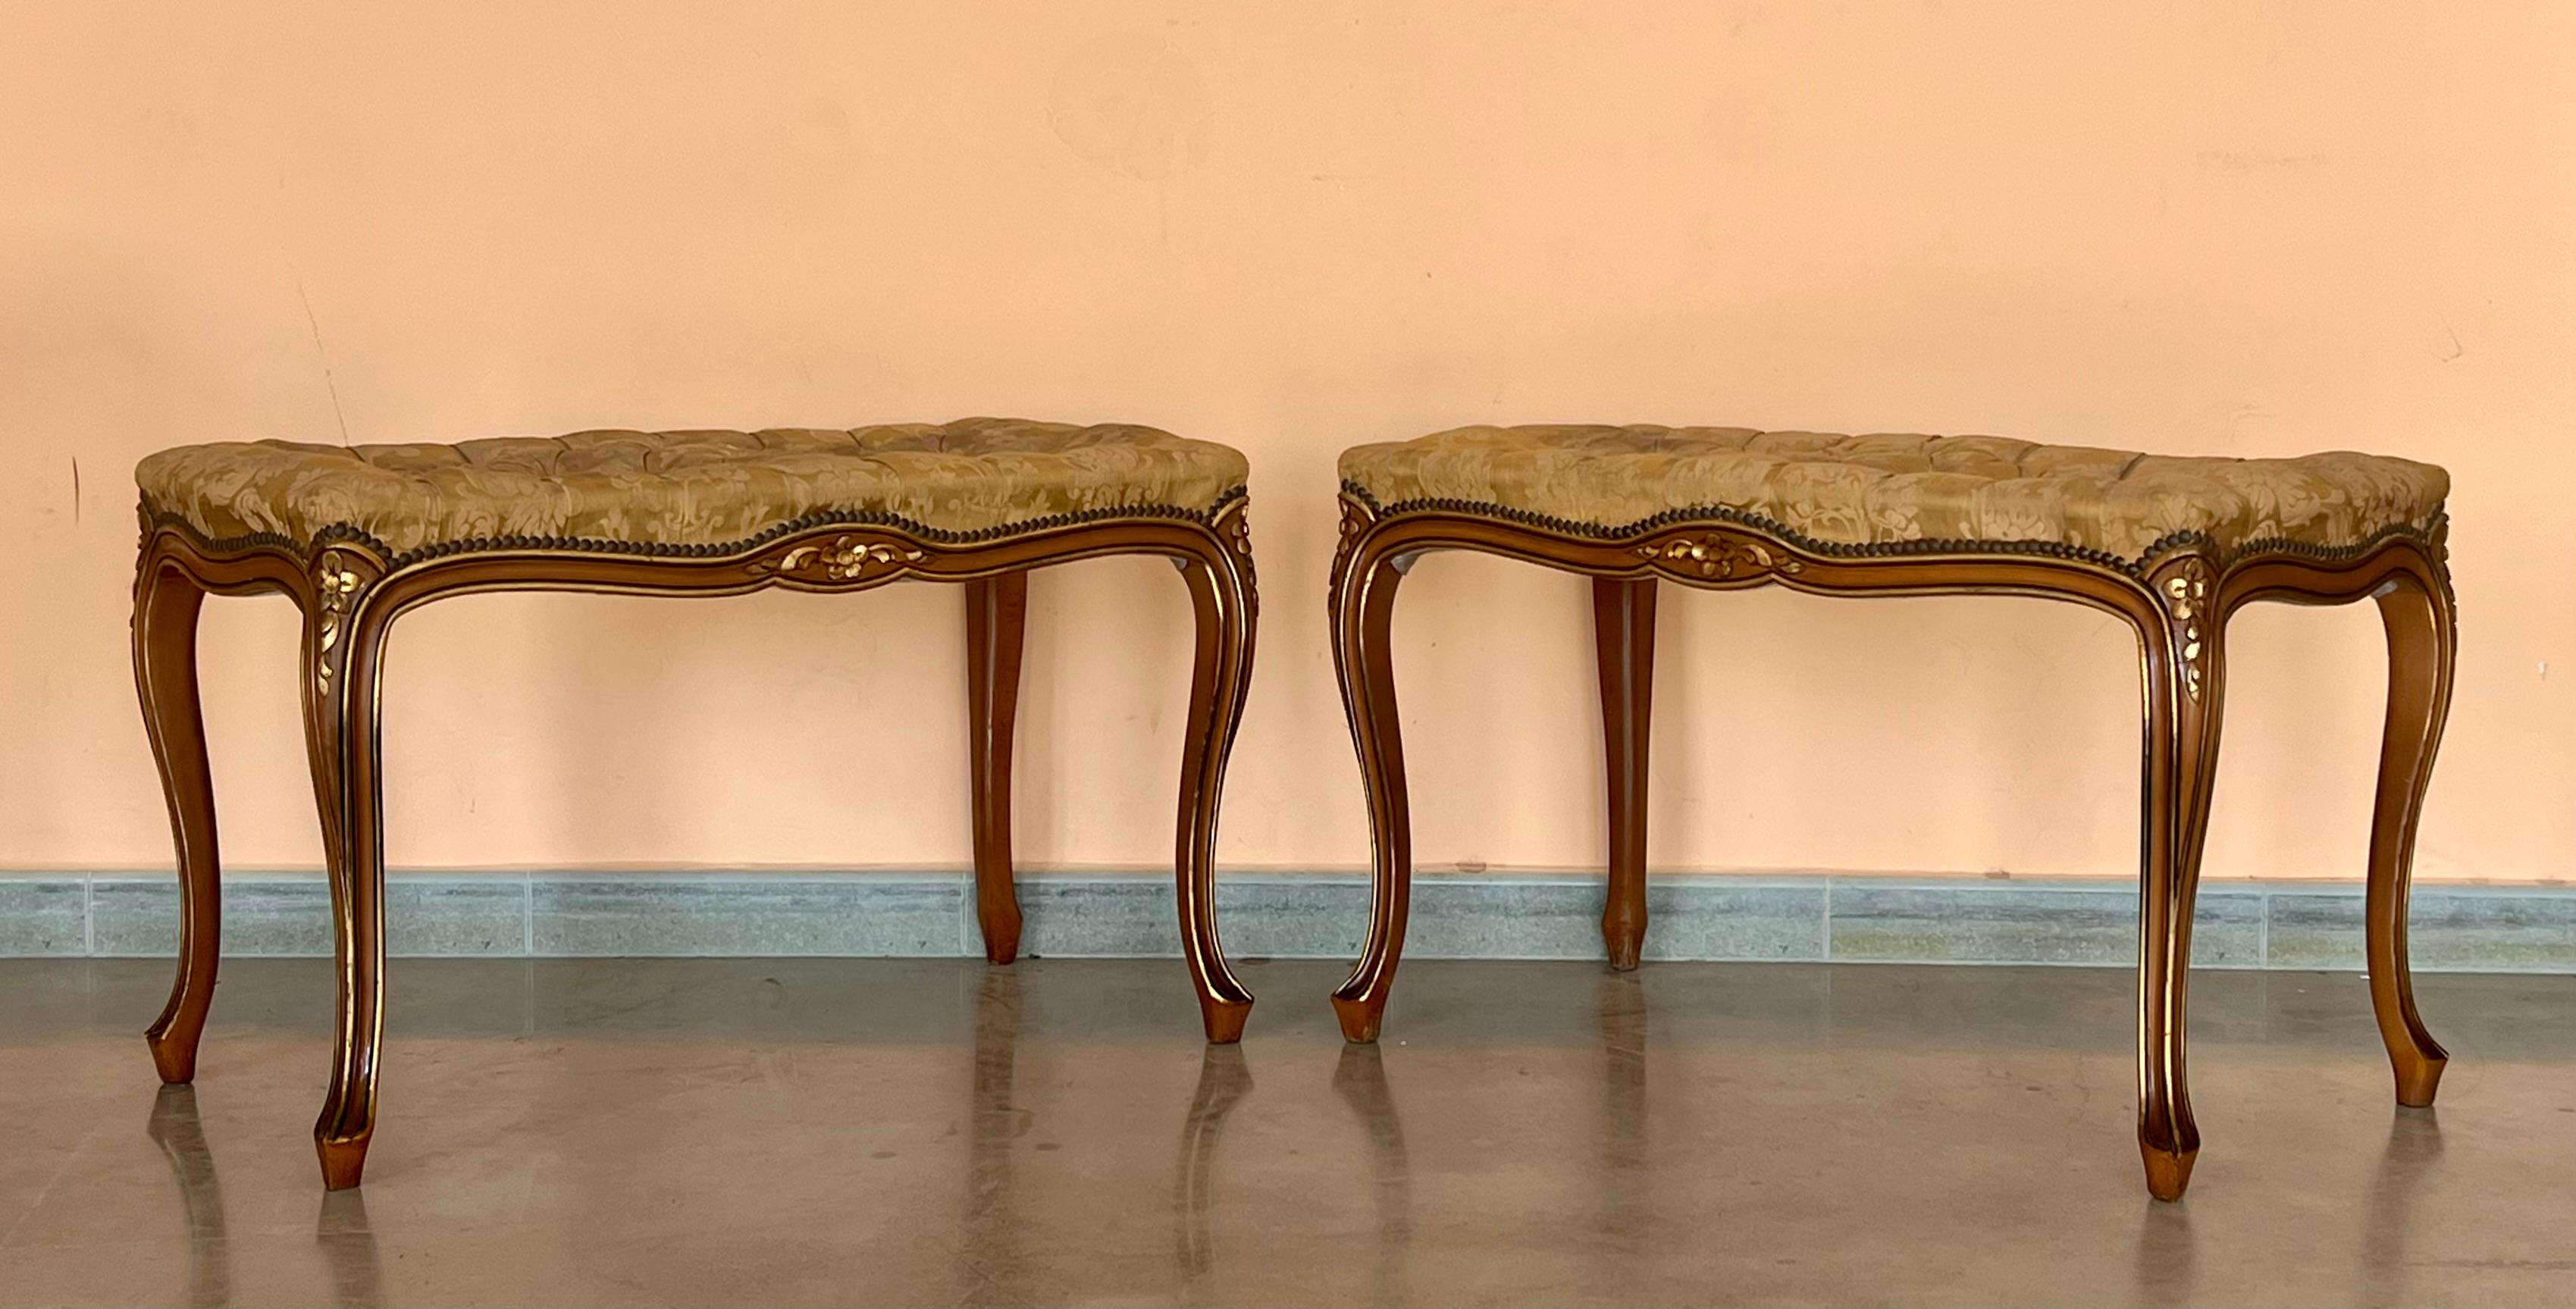 Pair of French Tufted Benches with cabriole legs In Good Condition For Sale In Miami, FL